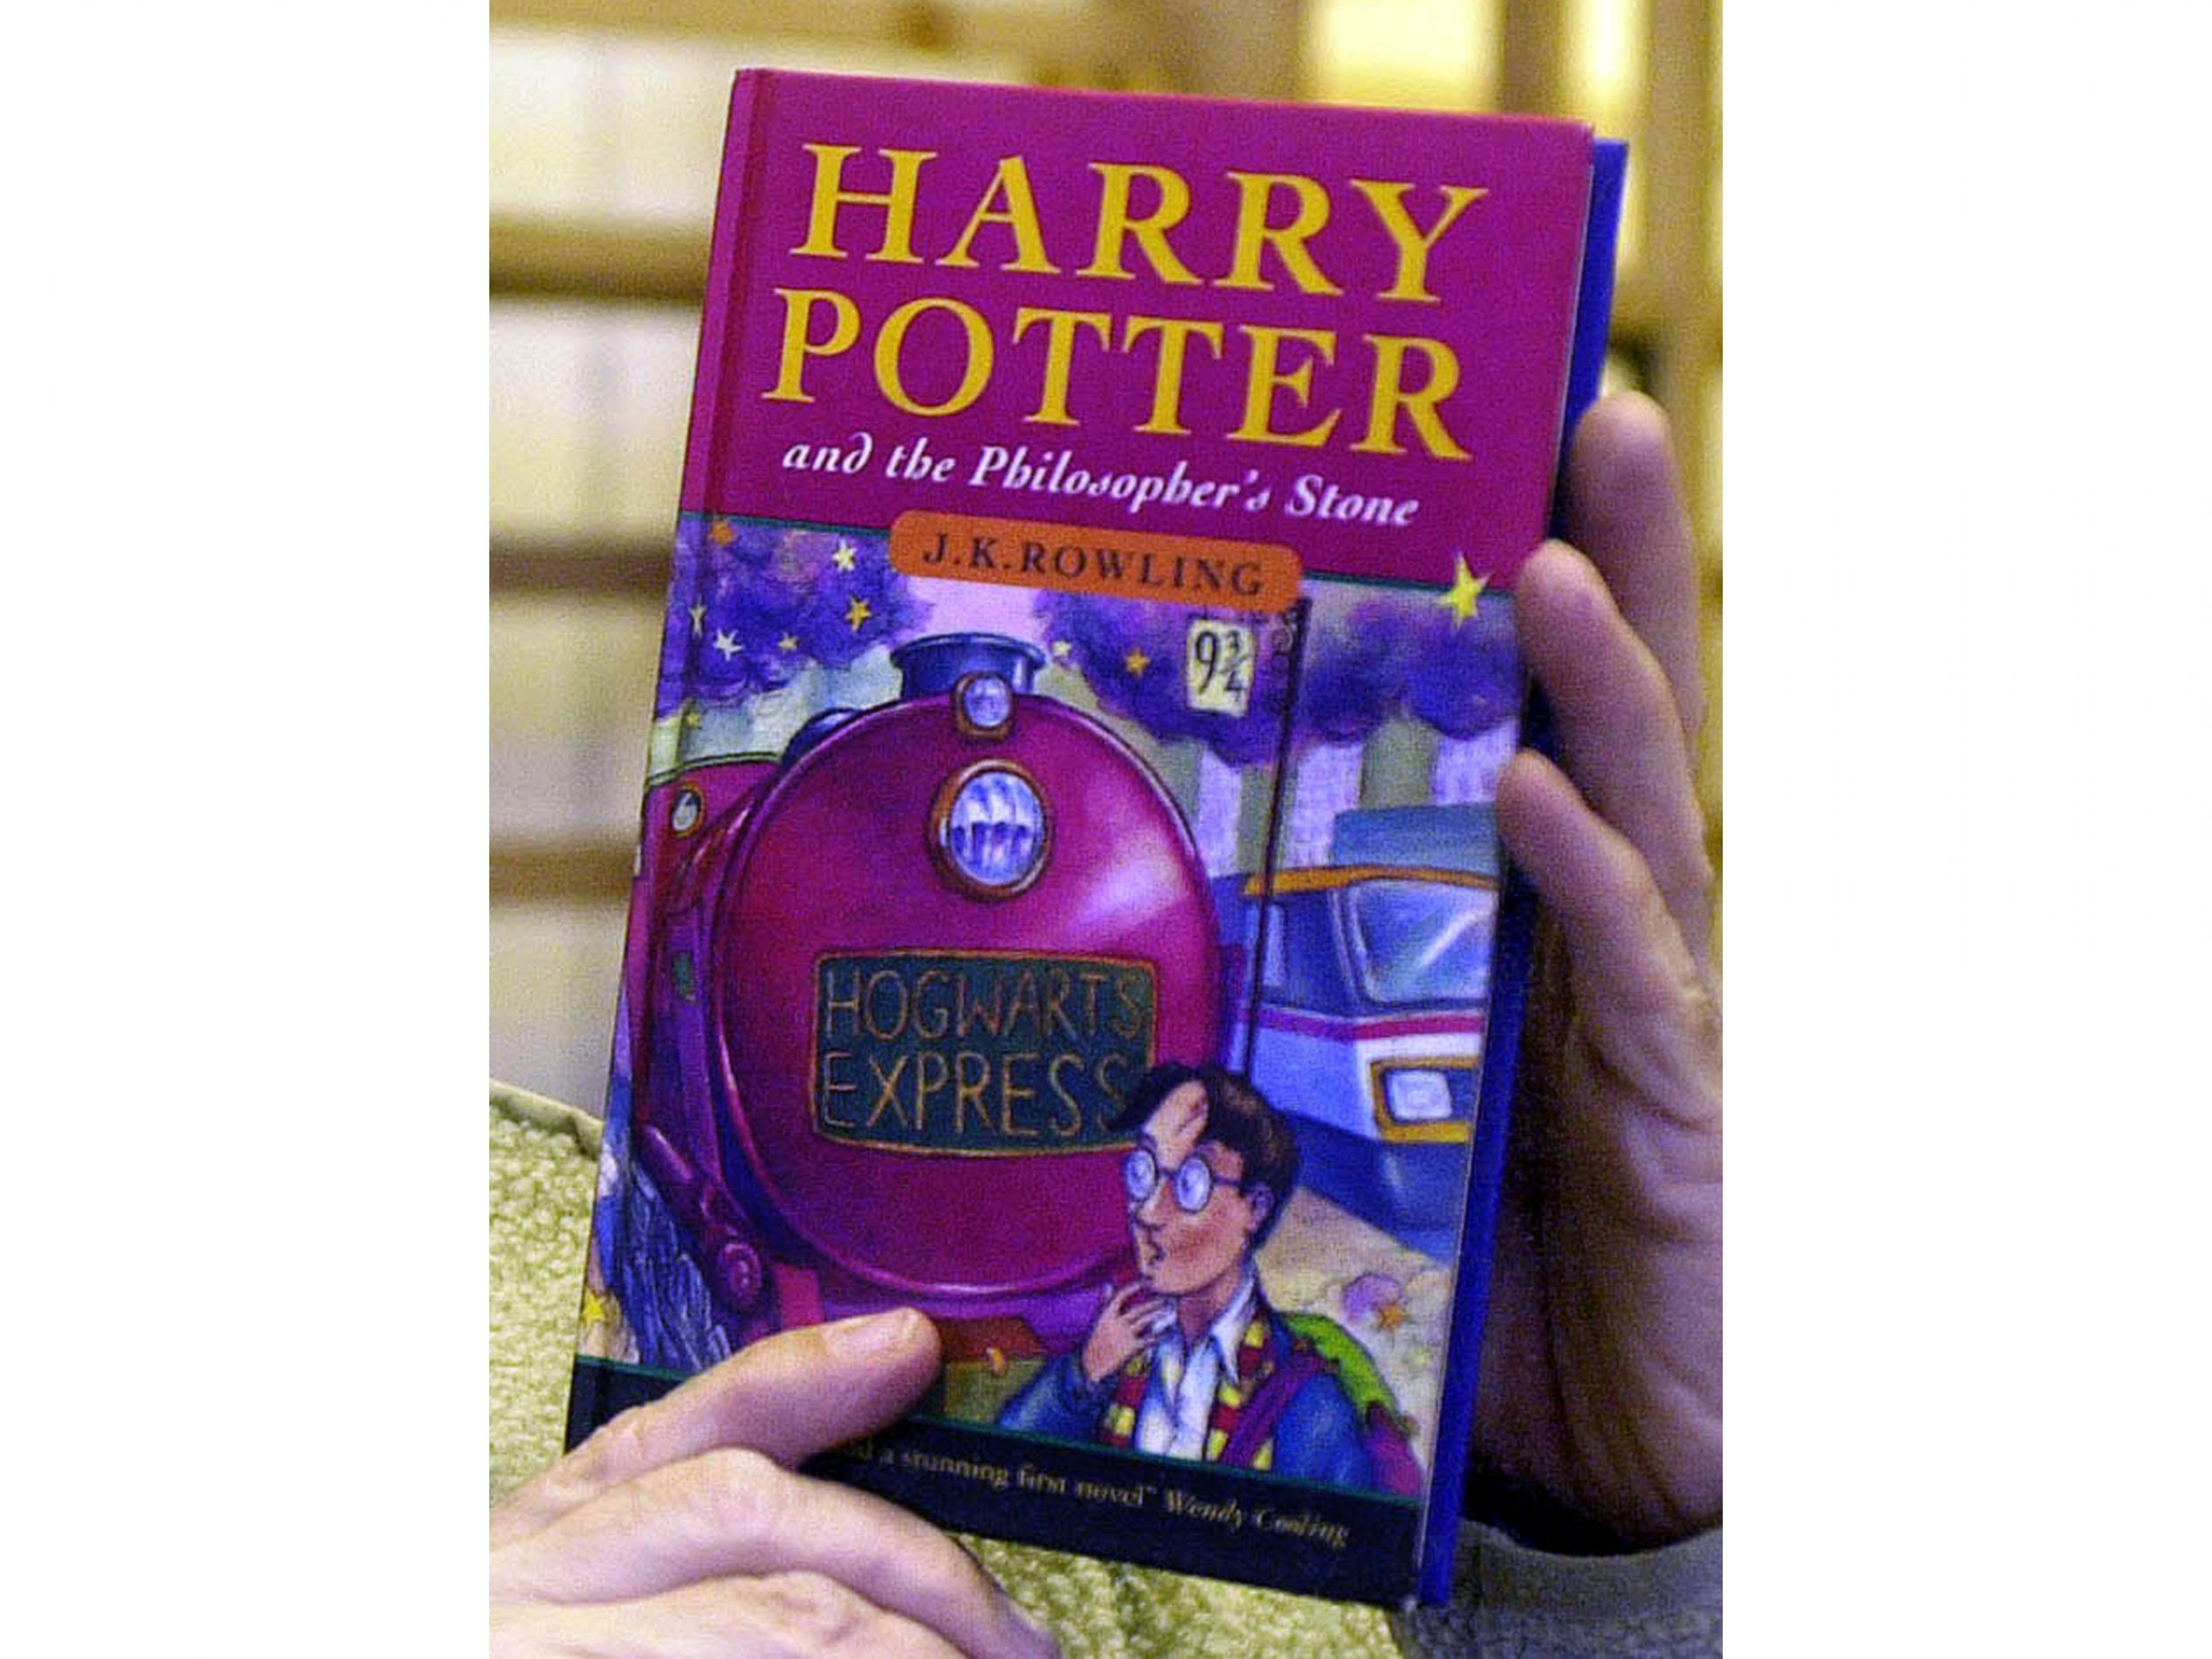 Harry Potter first edition sells for £60,000 - How to tell if you